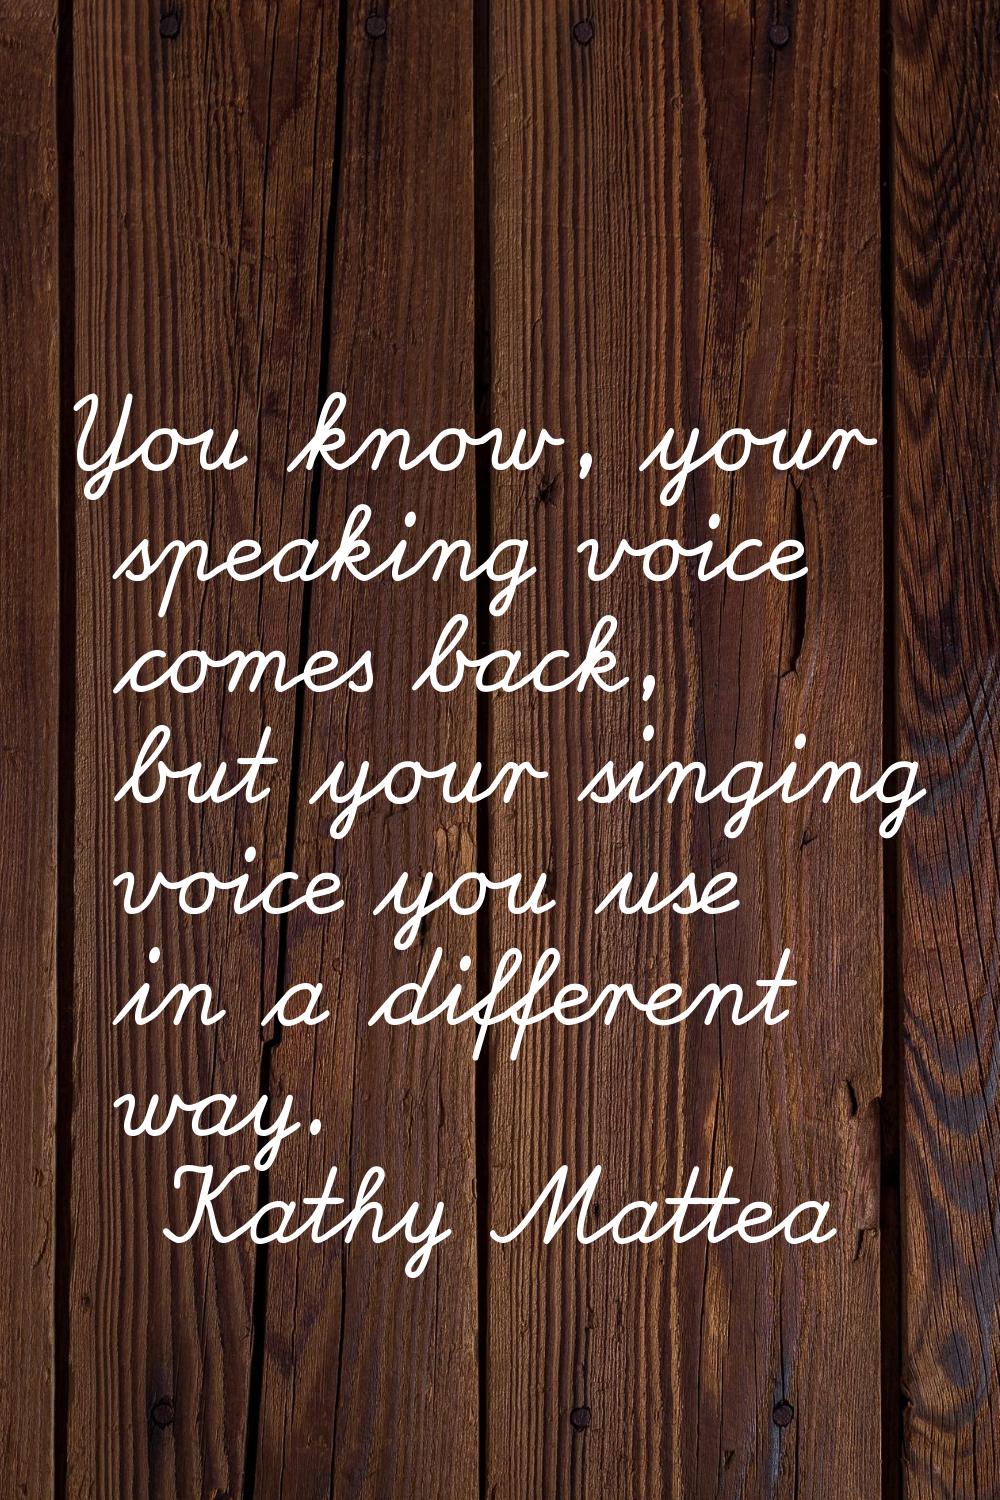 You know, your speaking voice comes back, but your singing voice you use in a different way.